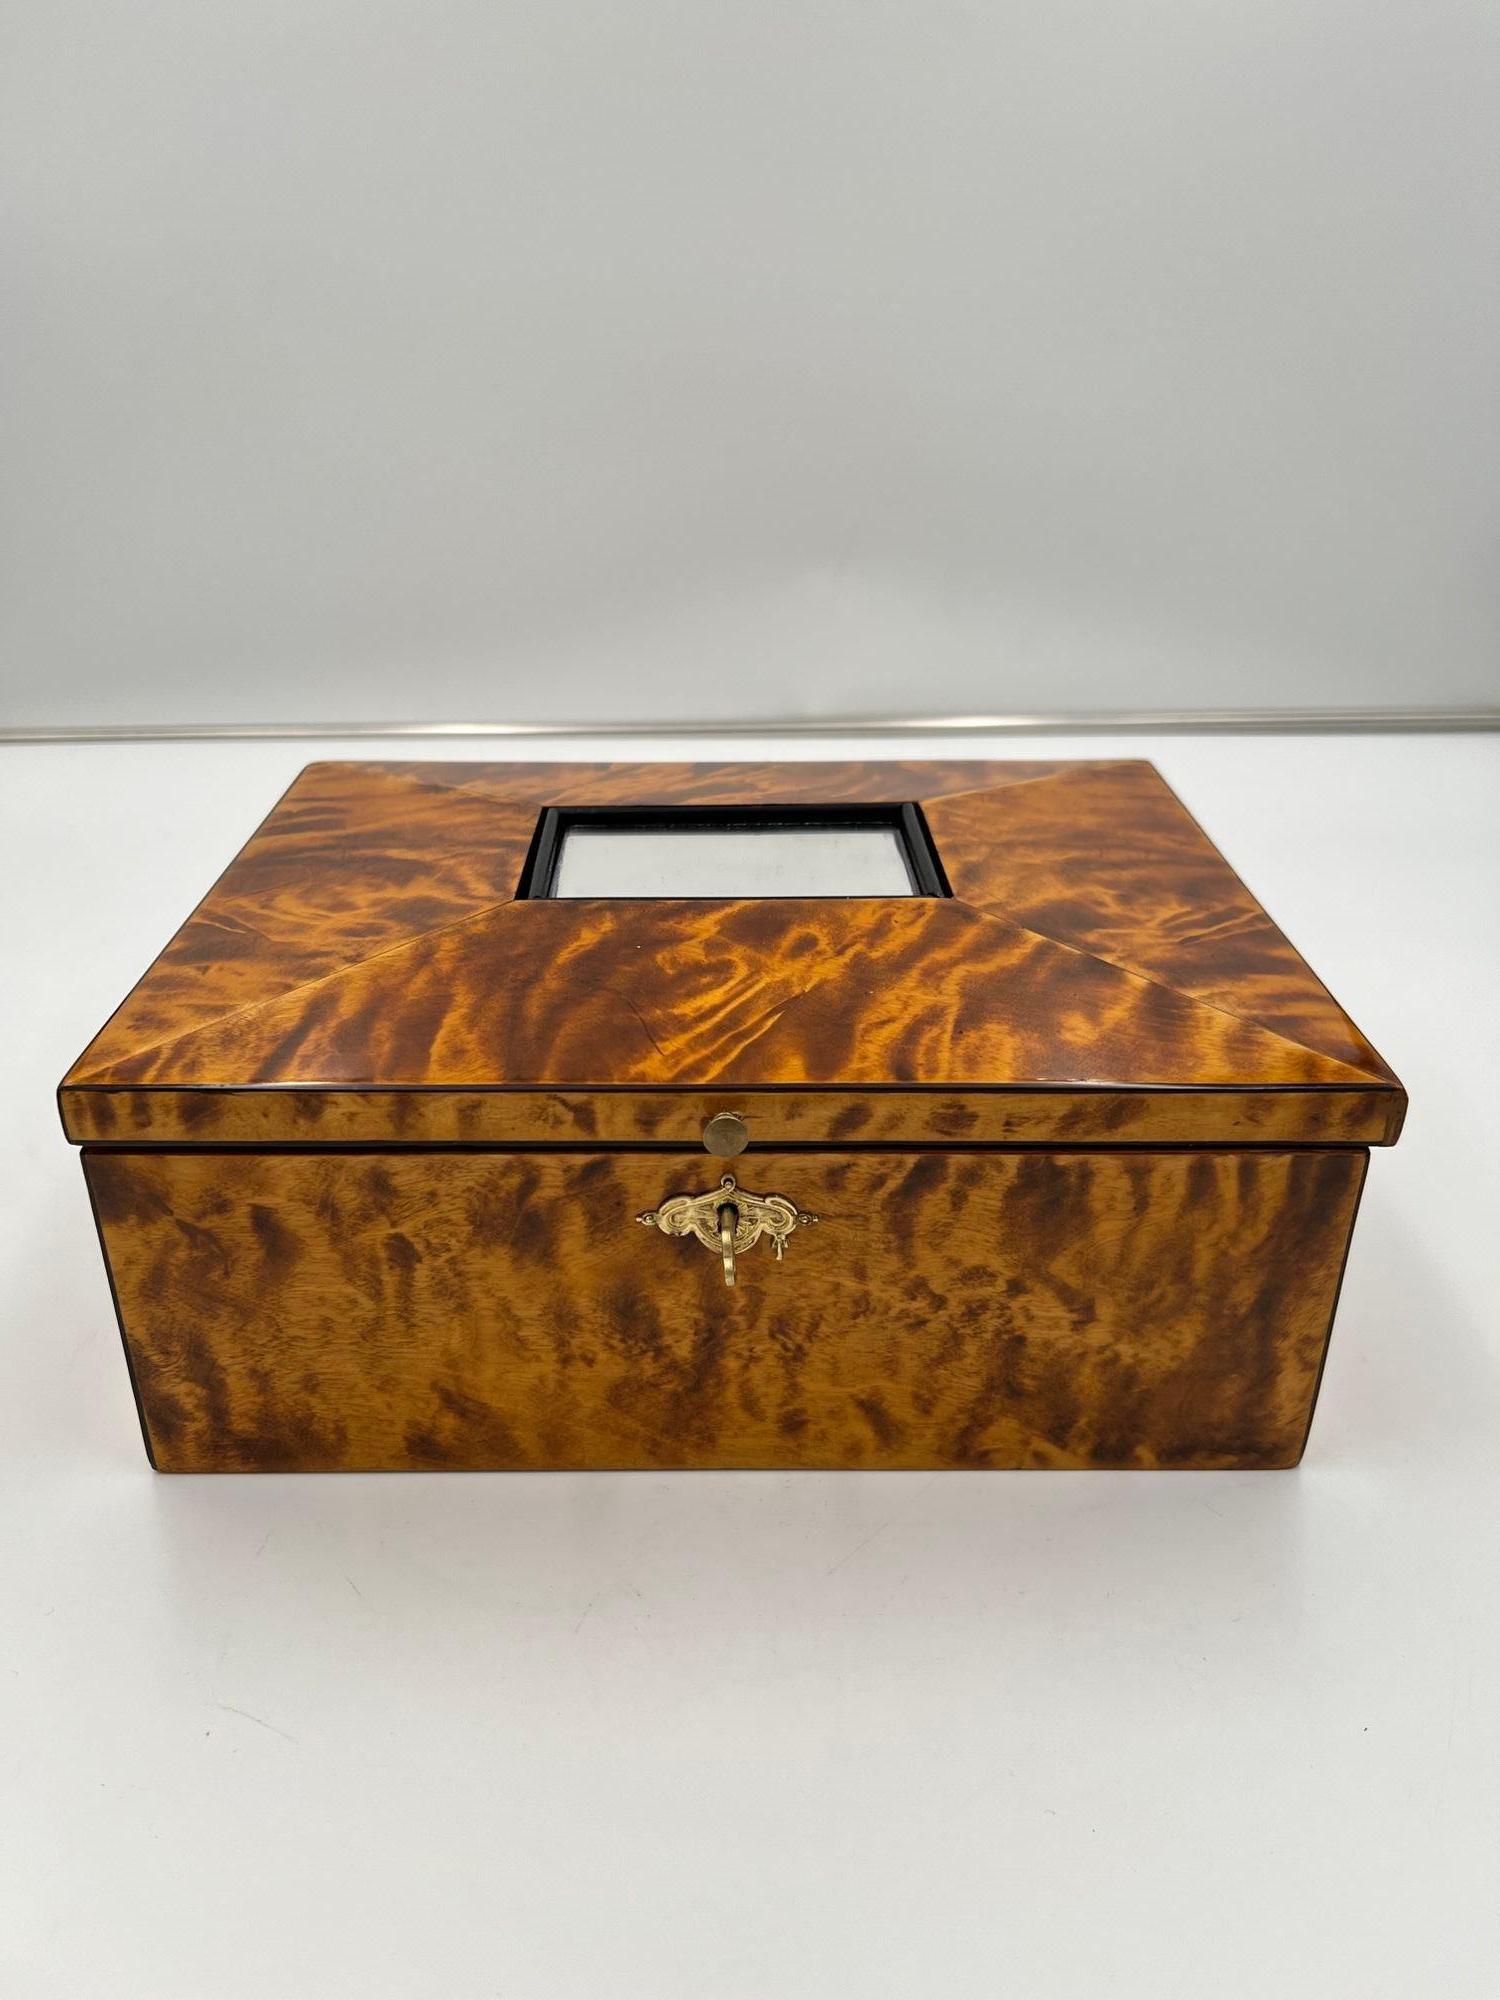 Beautiful Biedermeier Jewelry Box in Birch Wood from Austria circa 1820
Flamed birch veneer. Ebony inlay. Inside in bright Maple wood.
Mirror inserted into the top of the lid. Brass button and fitting.
Restored and hand polished with